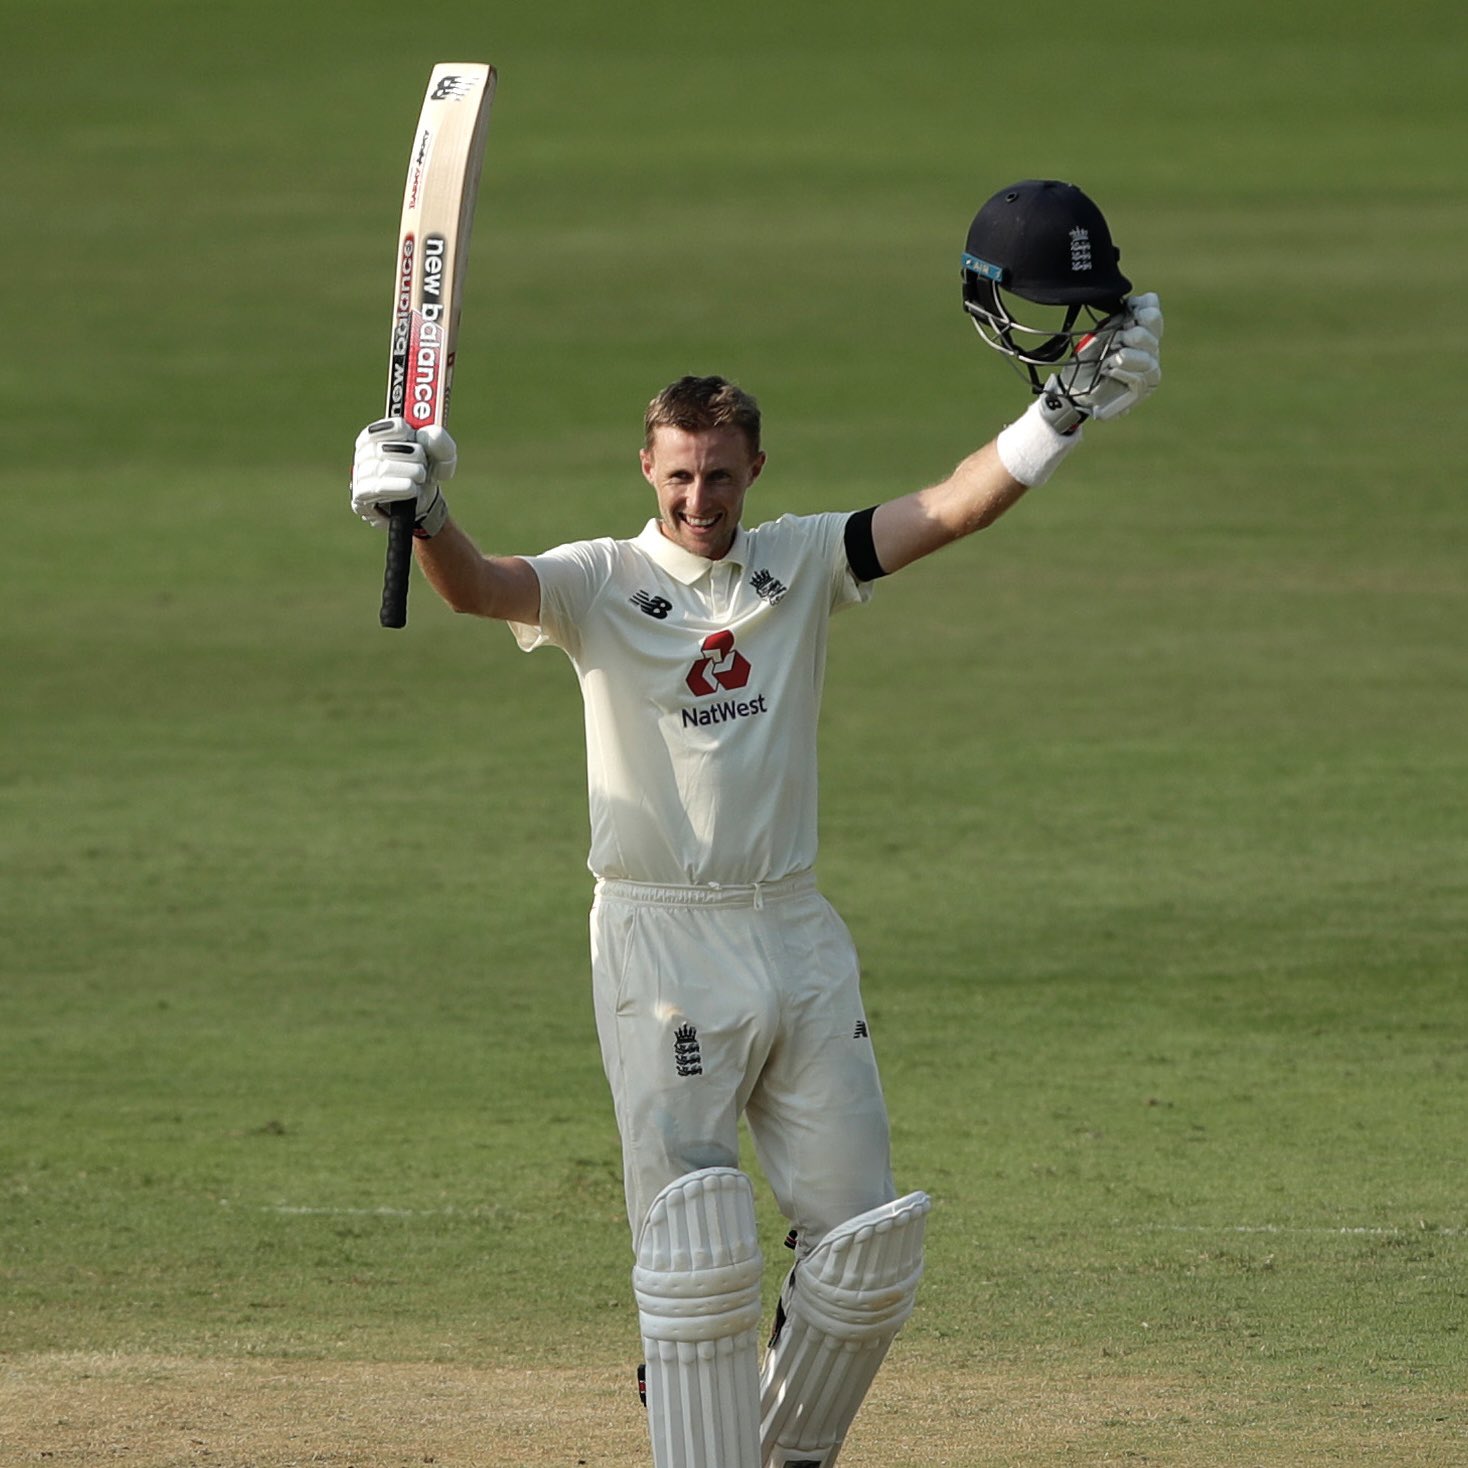 ICC Men’s Test Player Rankings: Root Closes In On Top-Ranked Williamson